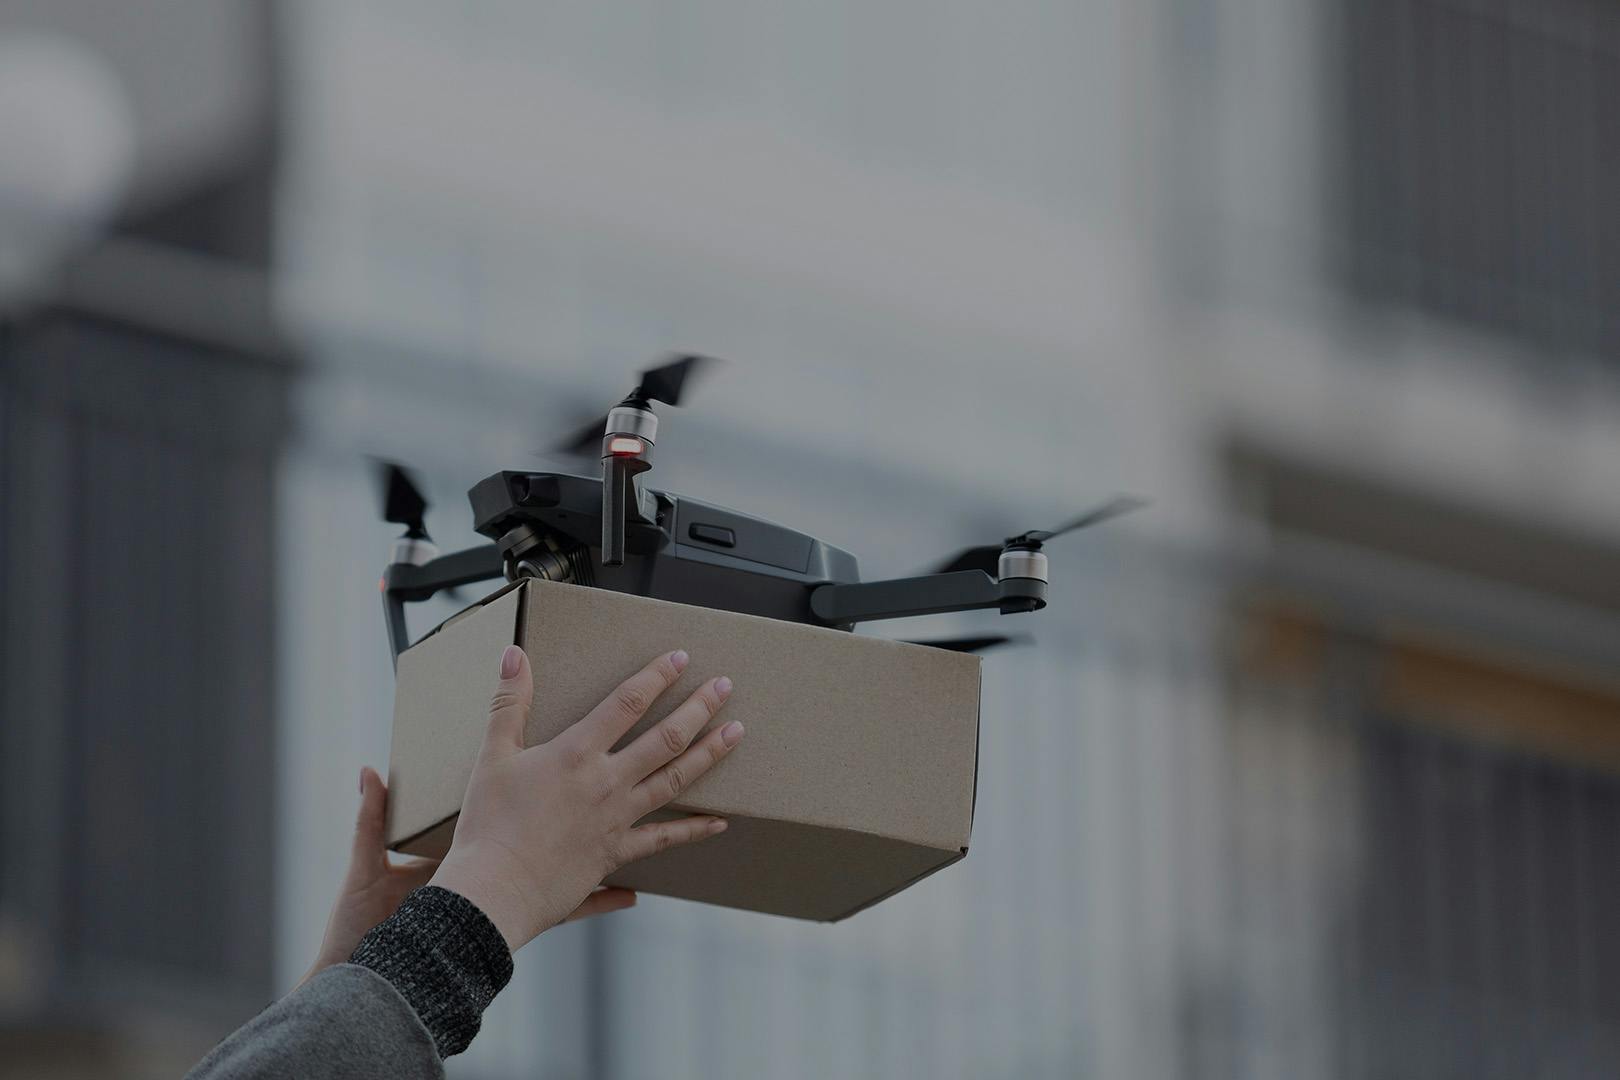 Person receiving package via drone